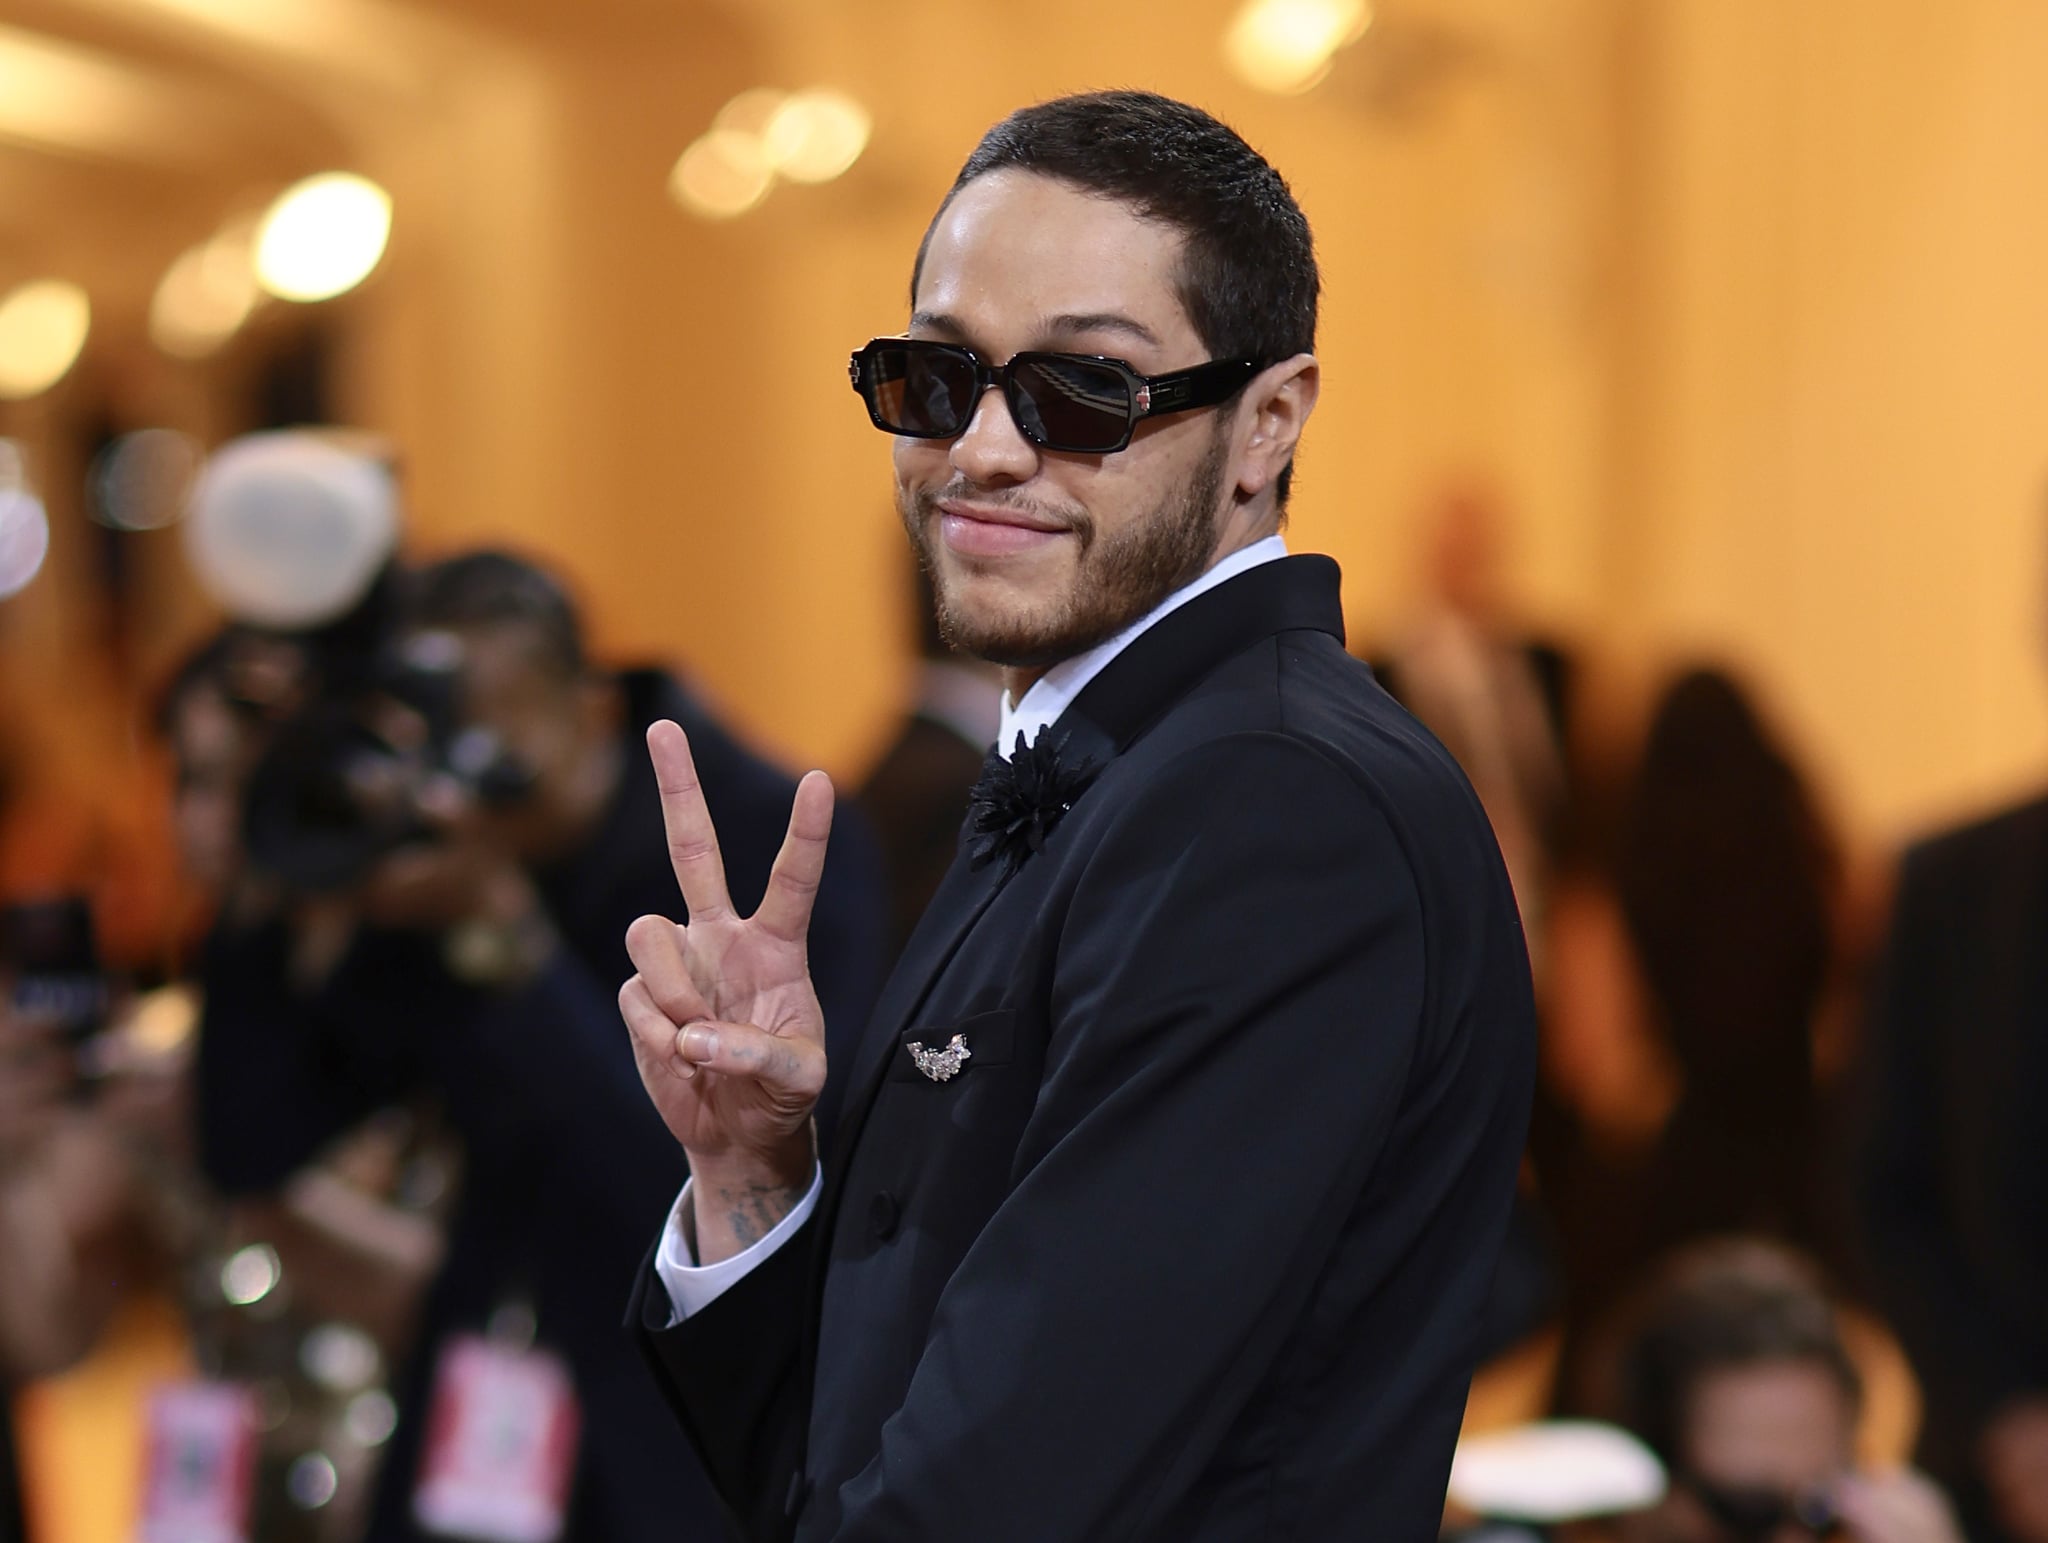 NEW YORK, NEW YORK - MAY 02: Pete Davidson attends The 2022 Met Gala Celebrating 